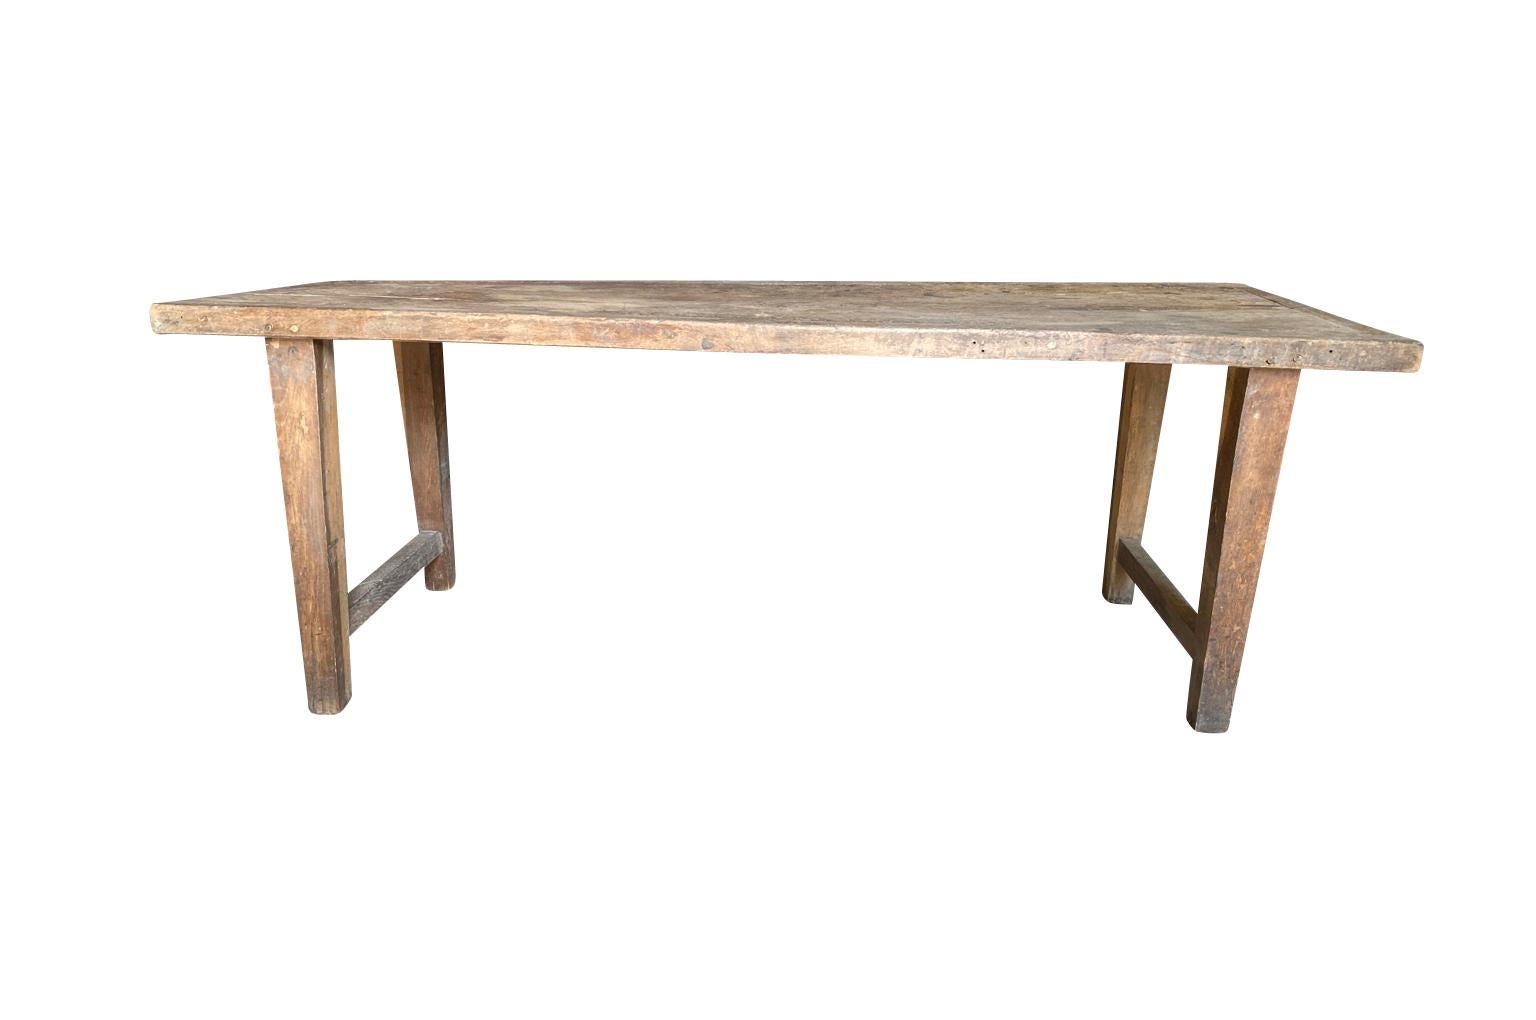 A very handsome later 19th century French primitive work table - Farm Table in oak. Minimalist lines lend this table a very contemporary feel. Lovely patina. Wonderful as a dining table or console as well.